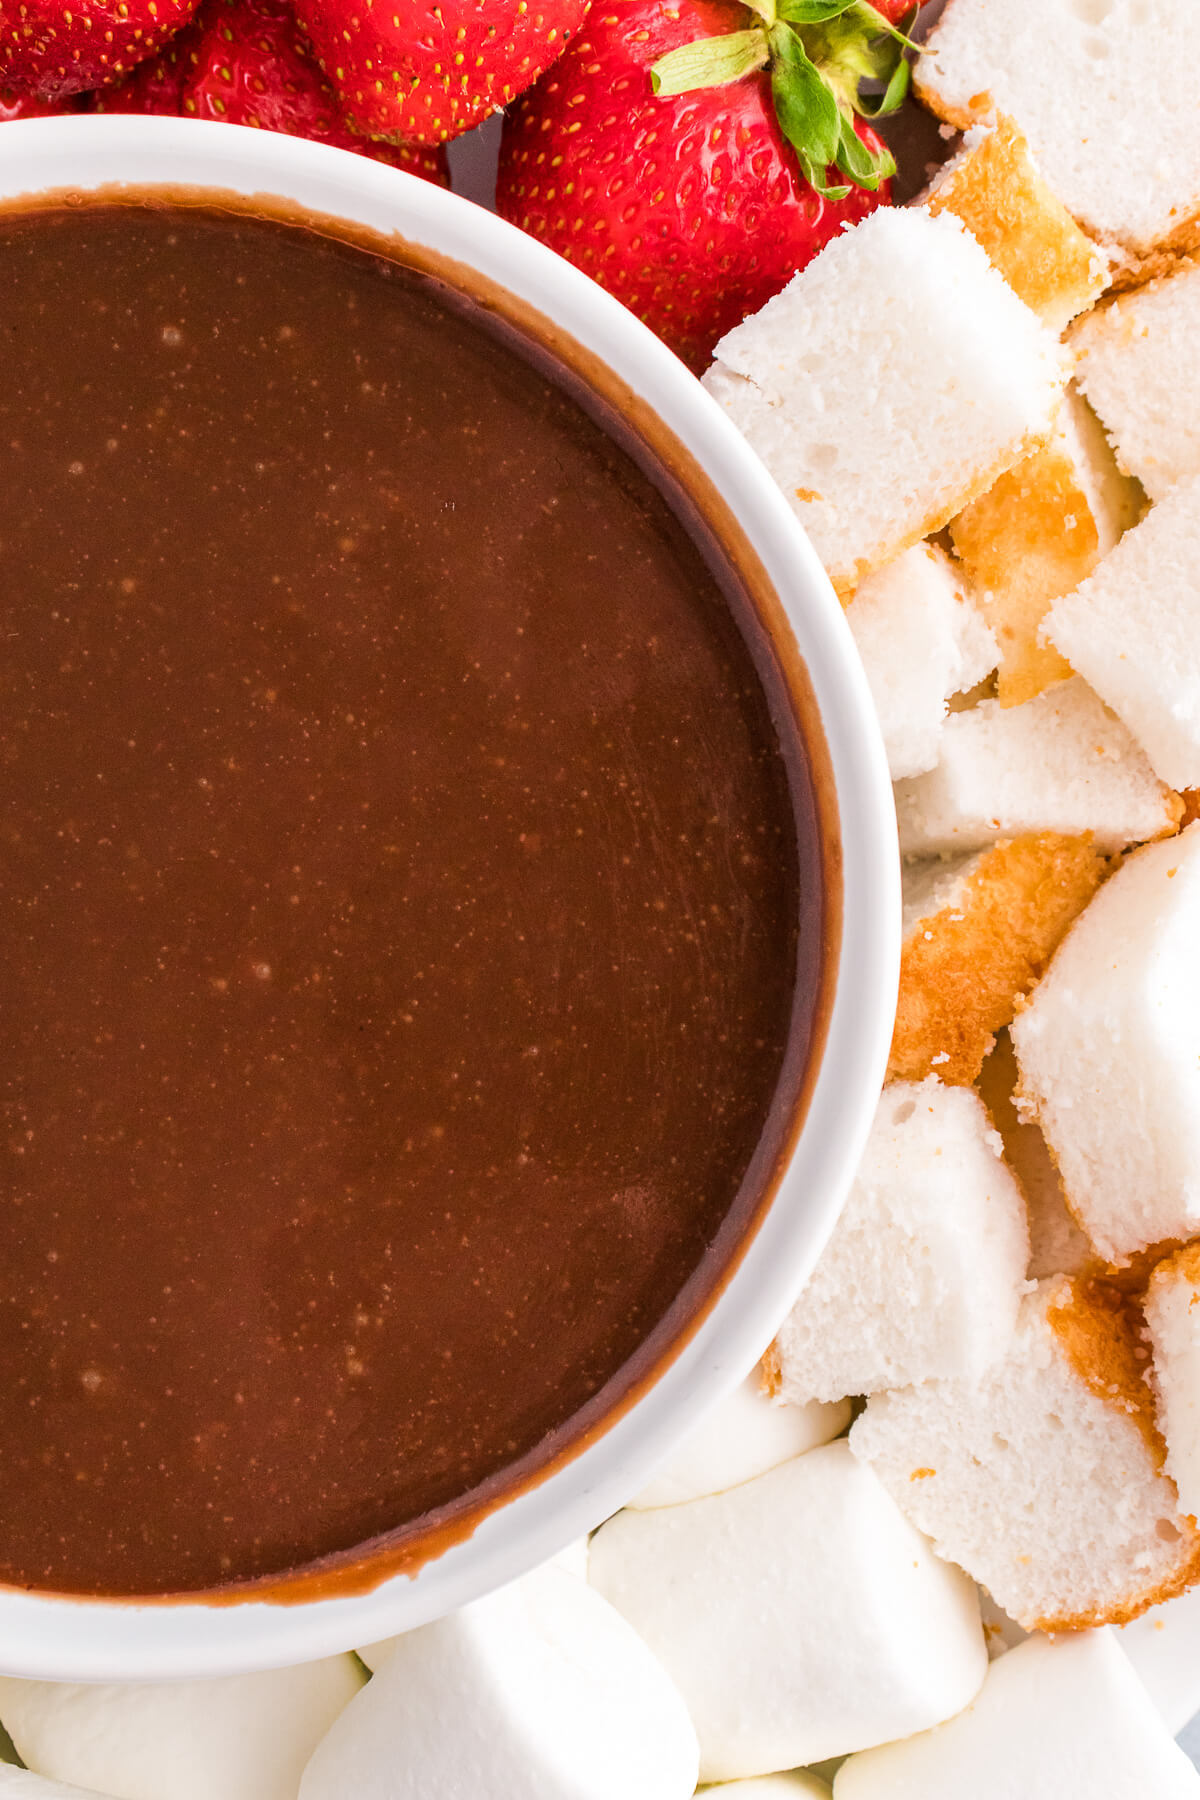 A dessert platter featuring a bowl of melted chocolate fondue surrounded by items for dipping.